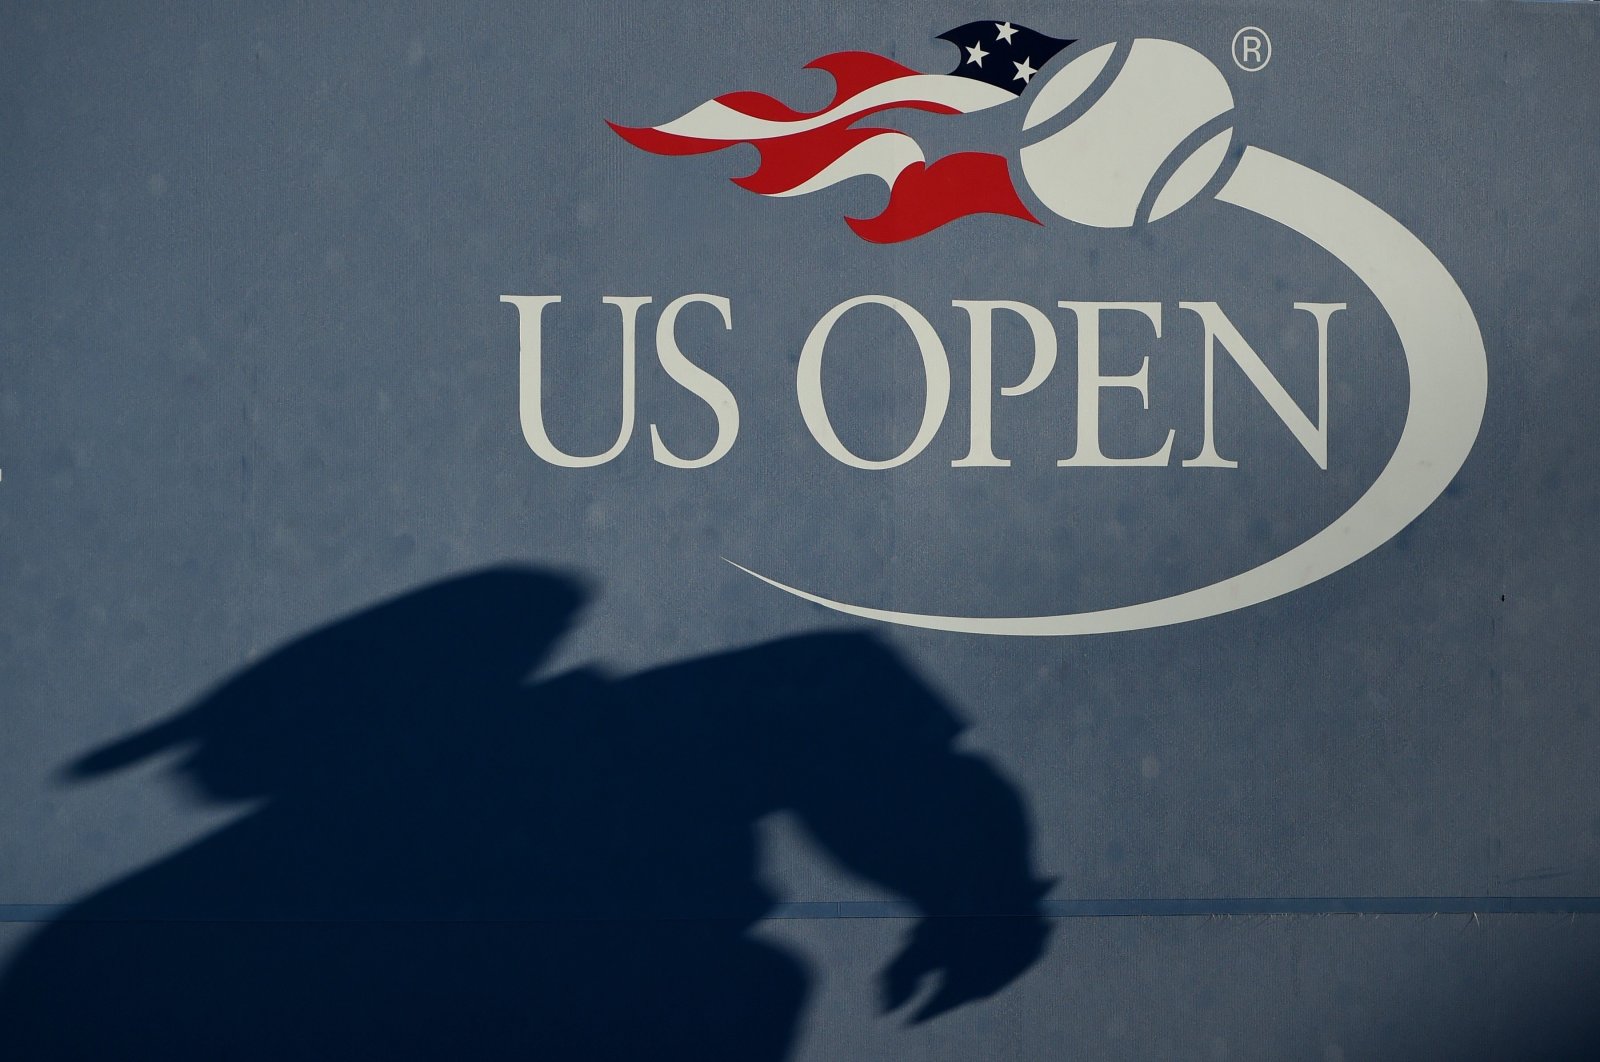 The U.S. Open logo is seen during a tennis match in New York City, New York, U.S., Sept. 3, 2016. (AFP Photo)